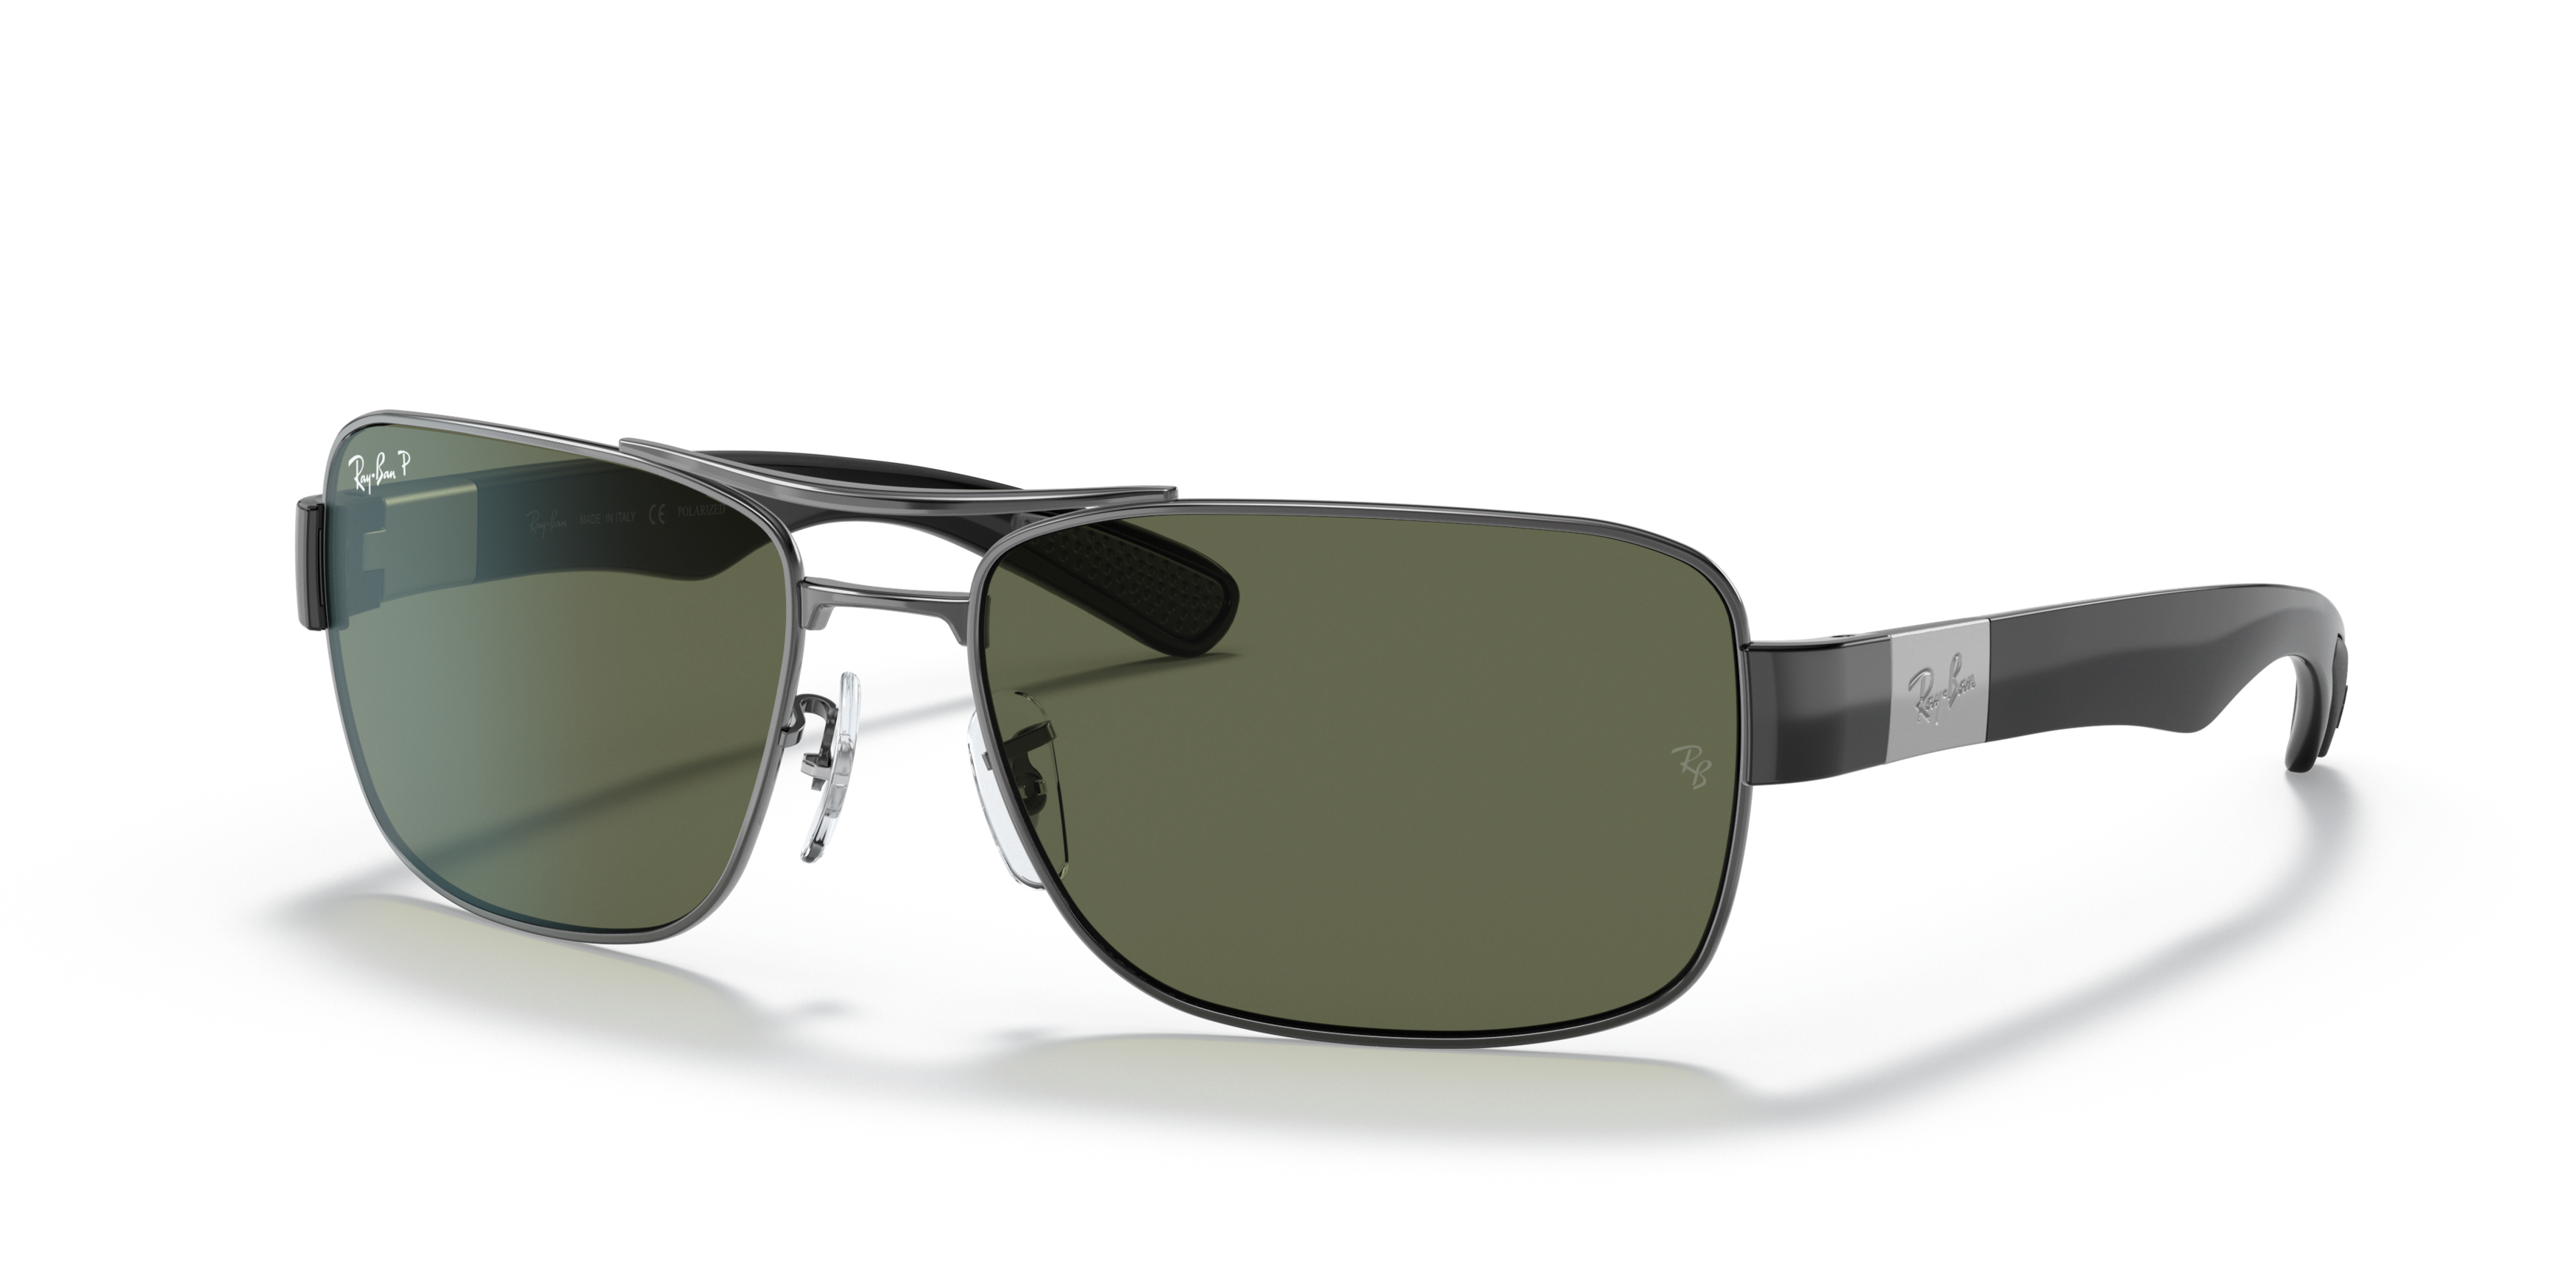 Angle_Left01 Ray-Ban RB3522 004/9A Verde / Cinza